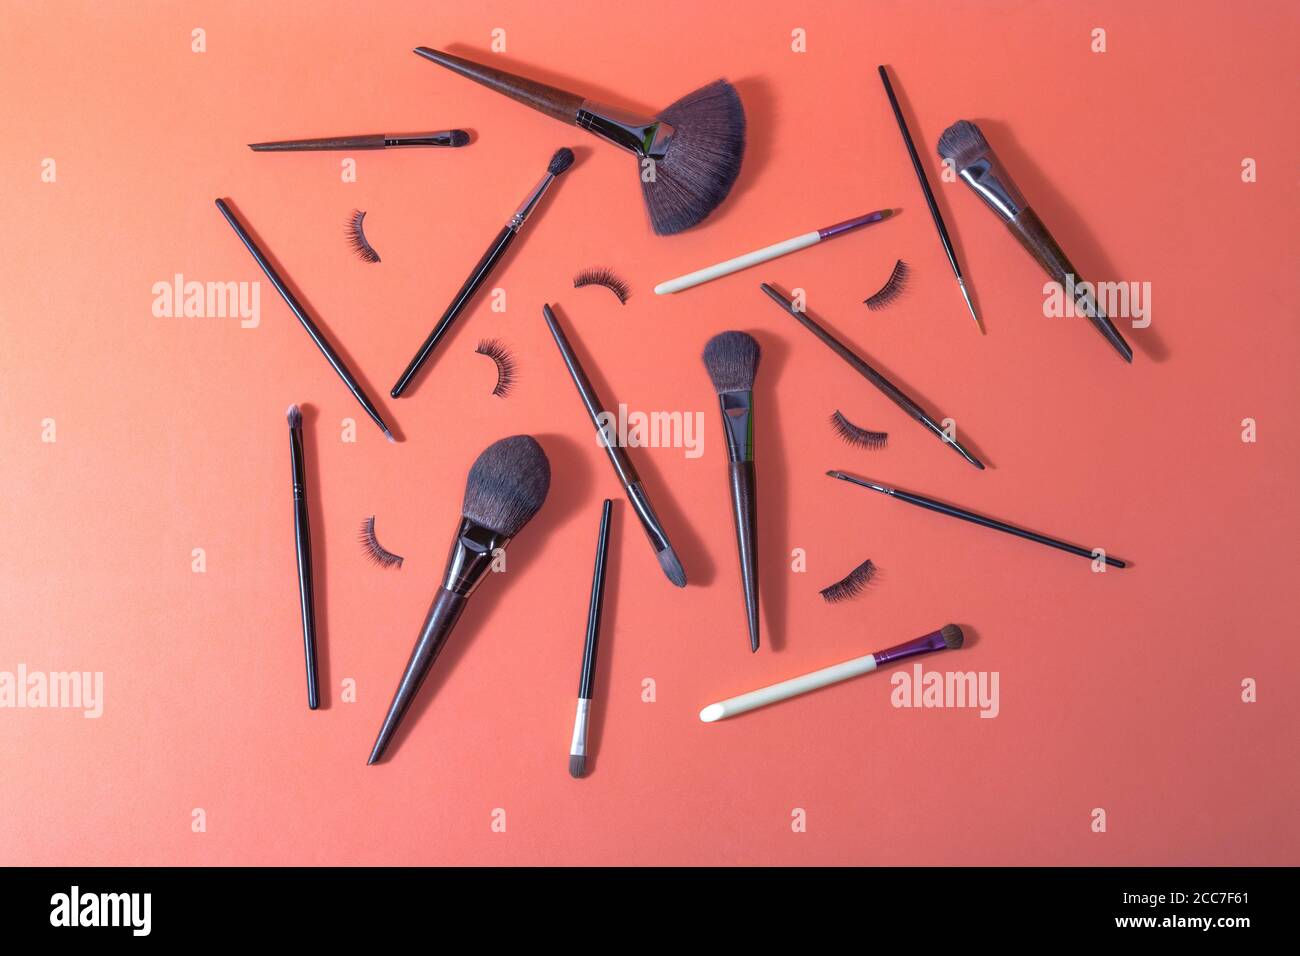 Orange surface on which there are different makeup brushes and false eyelashes for professional use Stock Photo